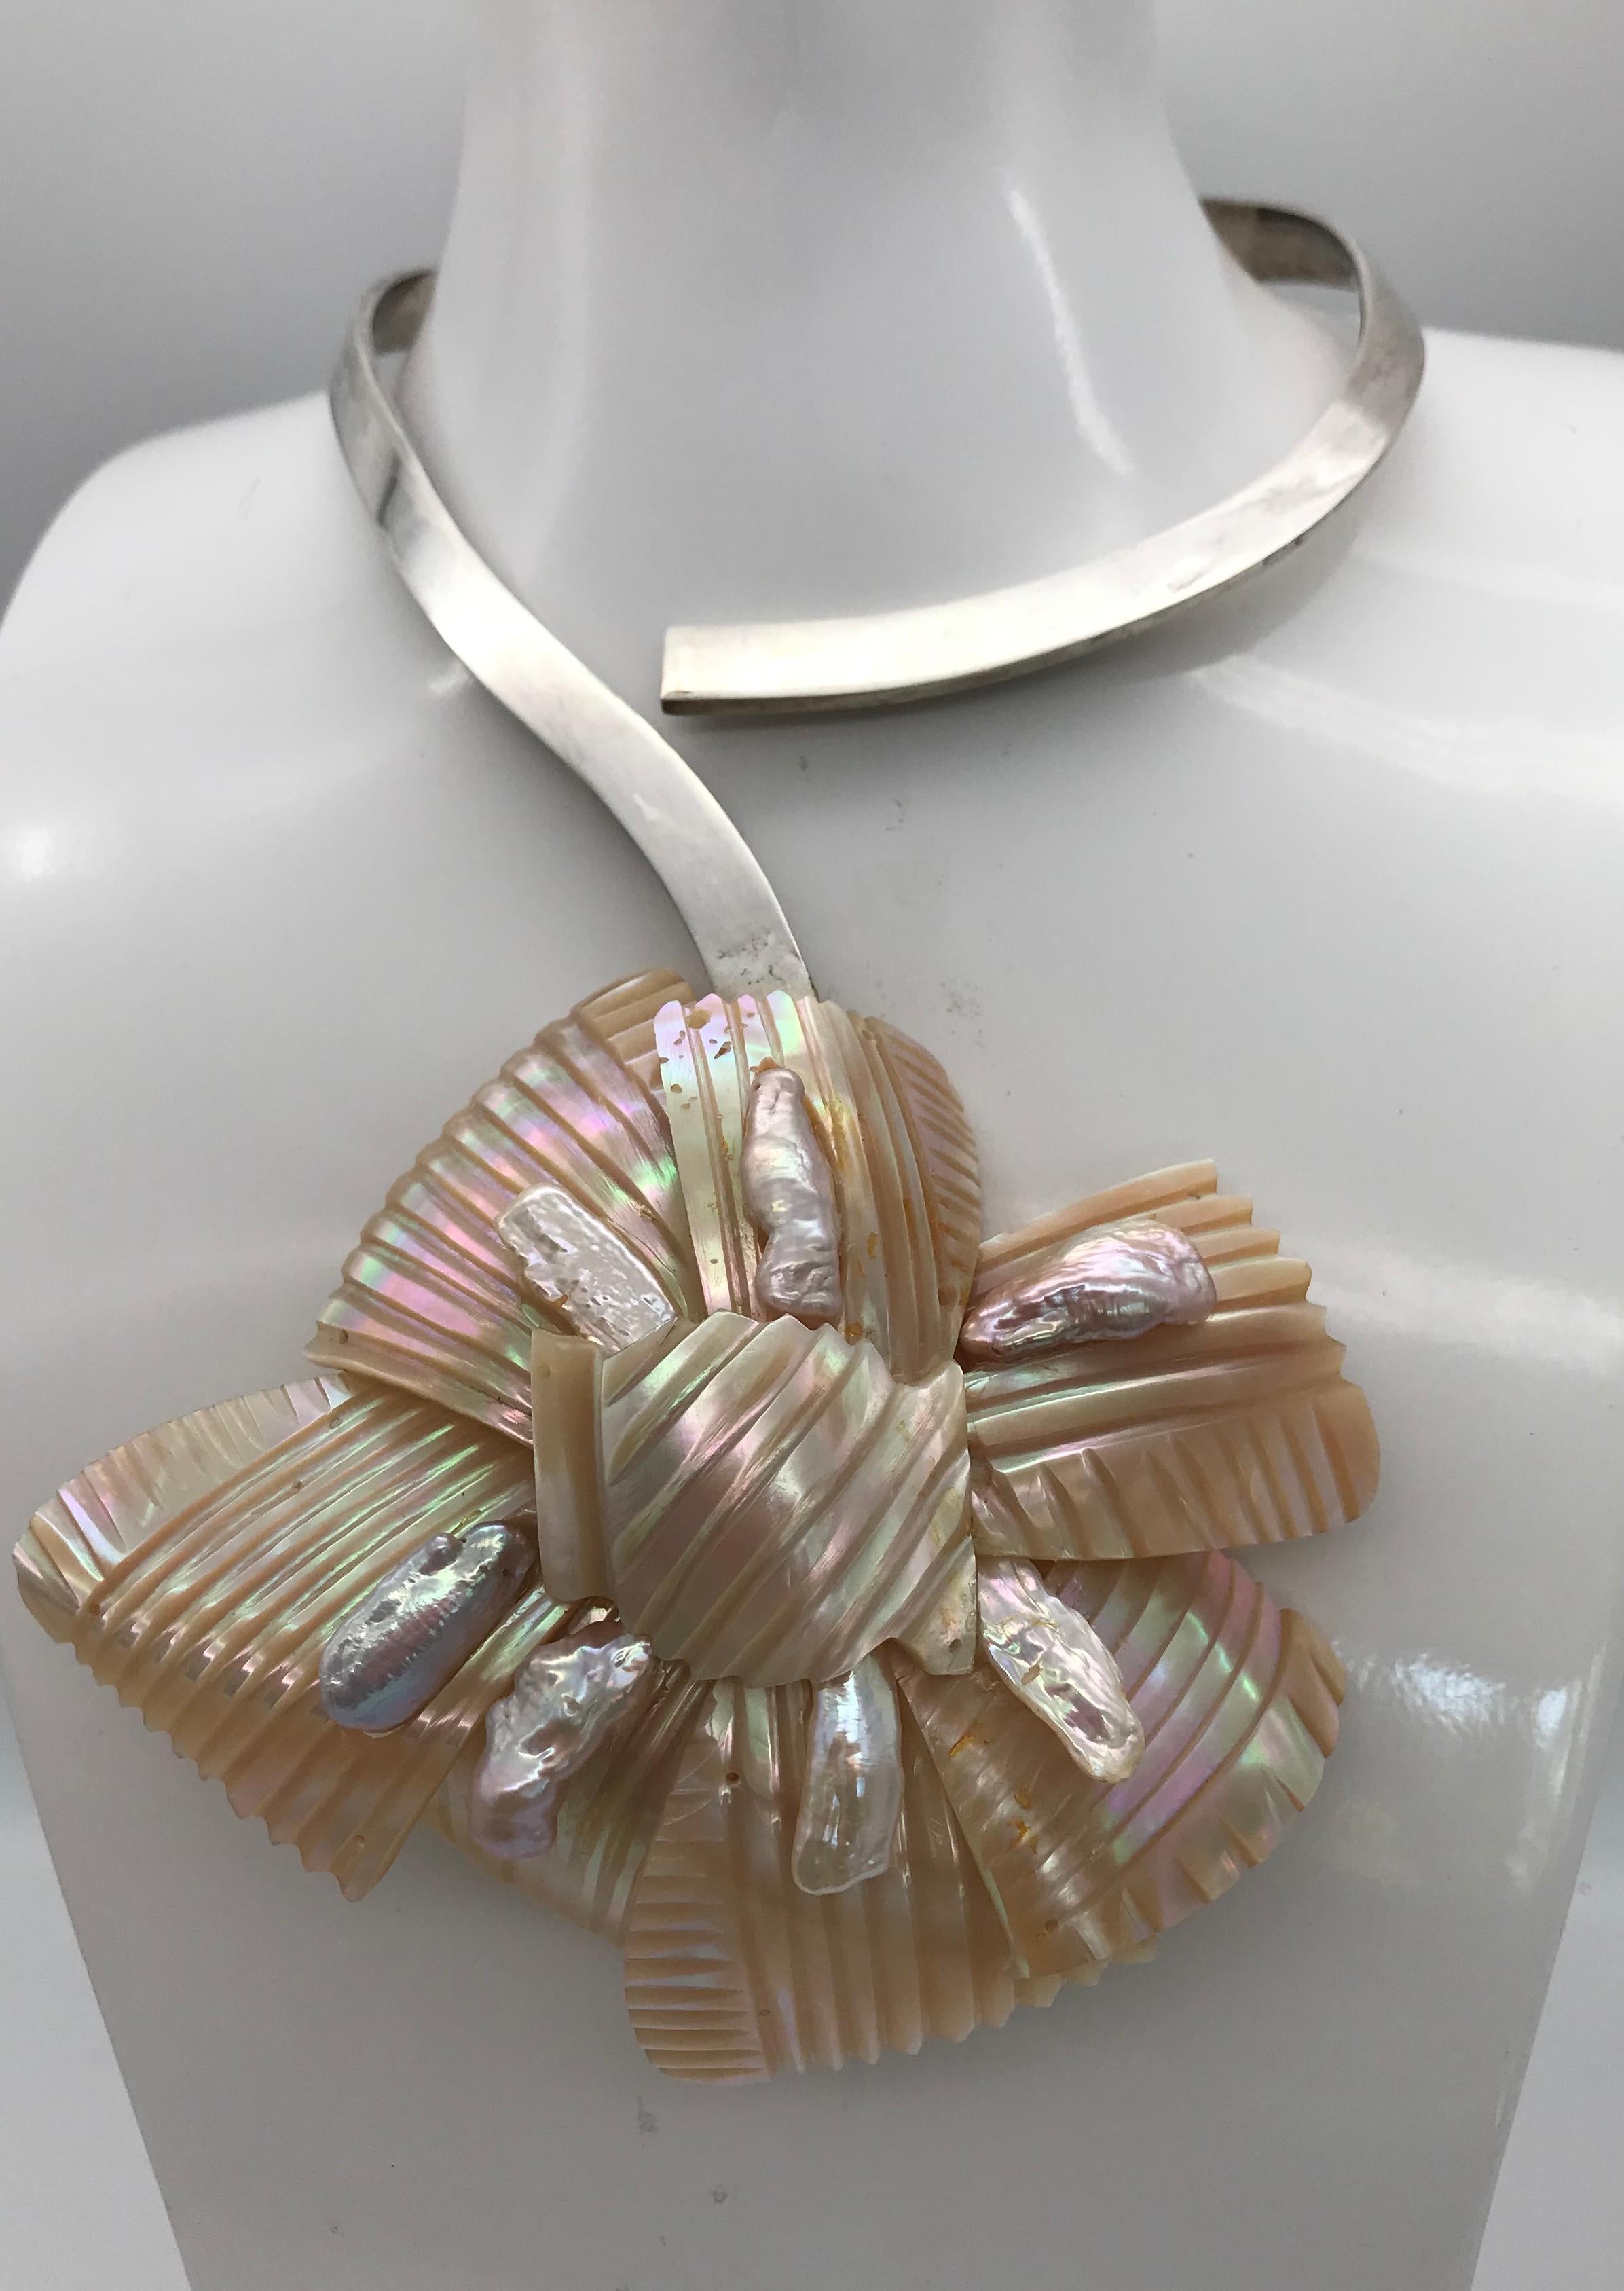 	

 Pink Nacre Turbos was a favorite shell in the Decorative Arts and Jewelry during French Deco and Victorian periods. The large Turbos are neither available in the wild nor grown in aquaculture farms. The materials Gottwald uses are antique, from